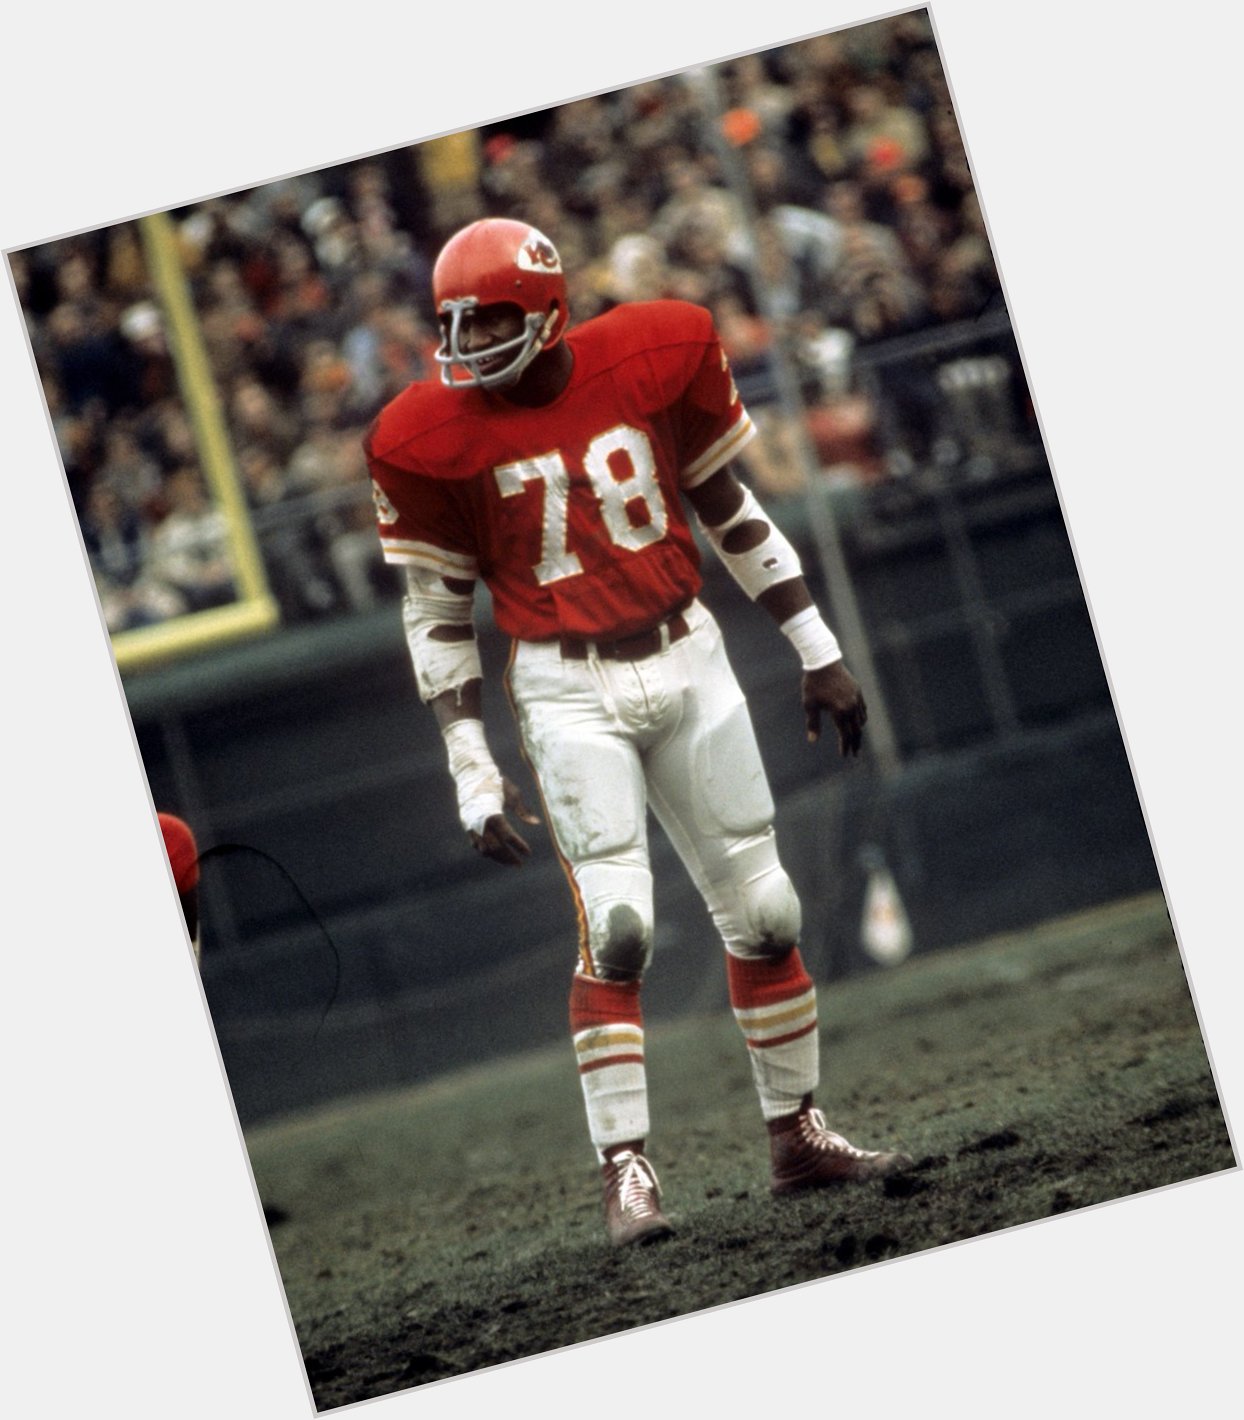 Happy Birthday to Bobby Bell, who turns 77 today! 